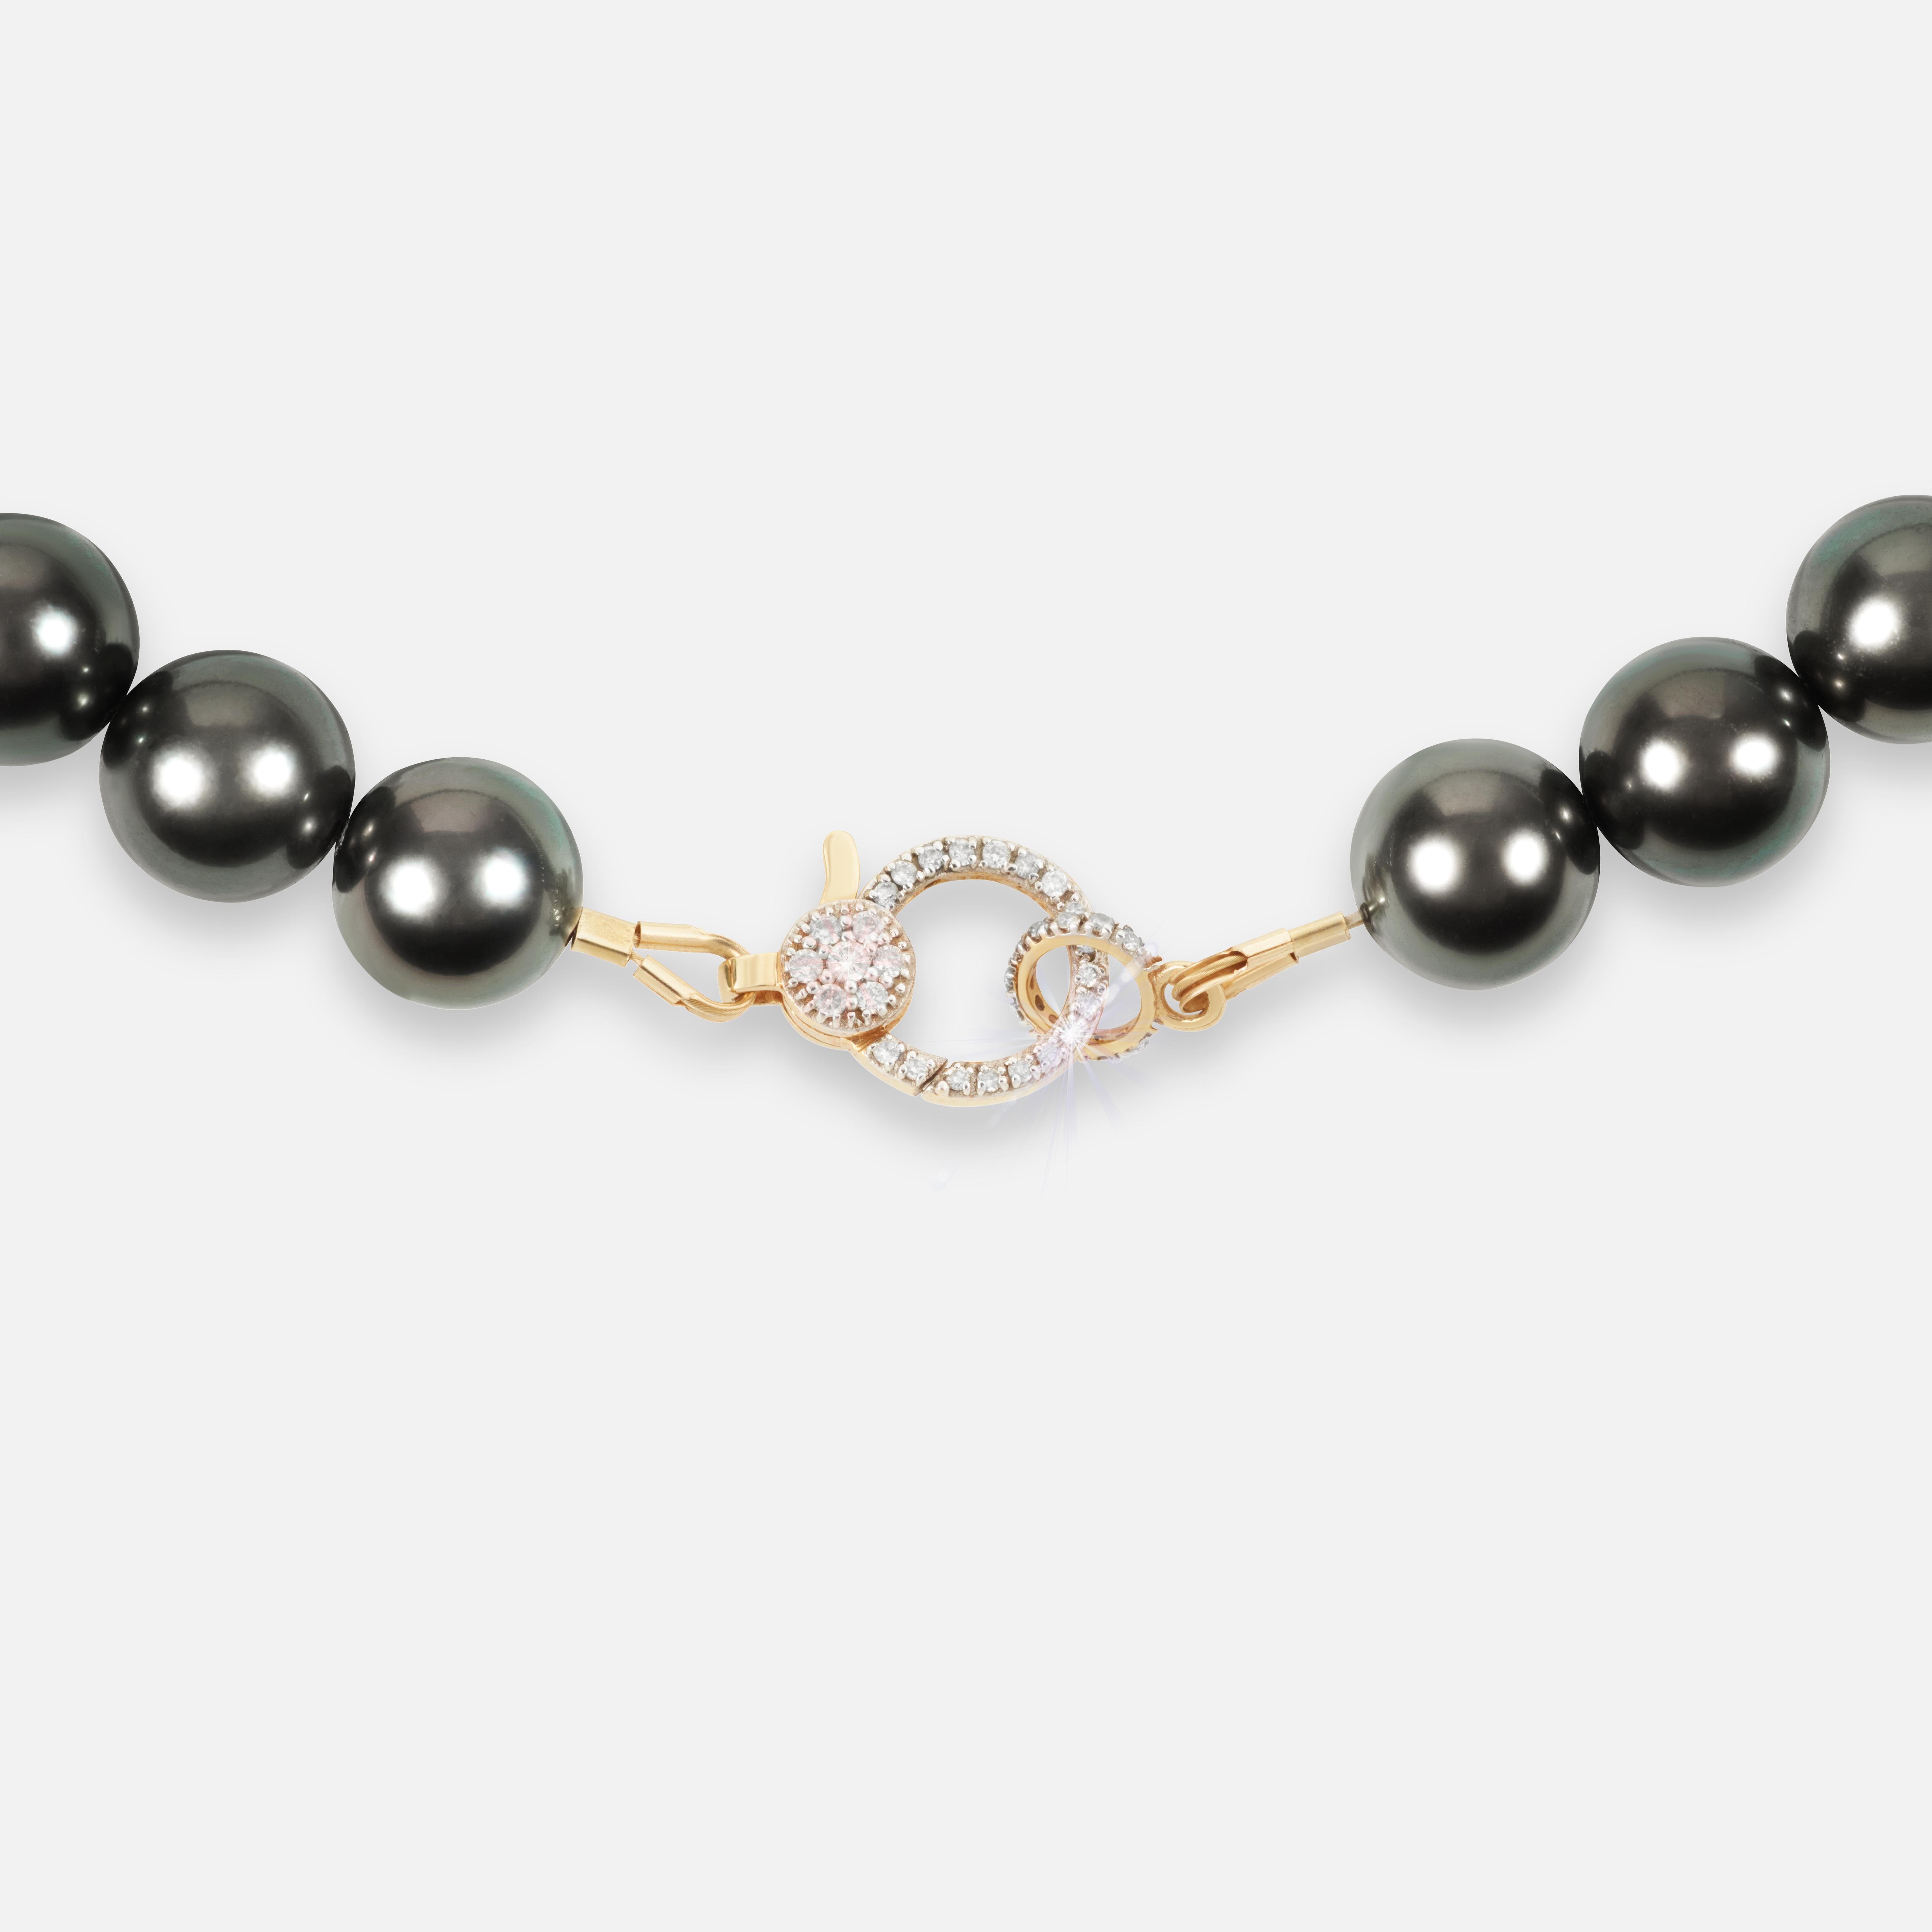 THEVAULT15 ́s lustrous pearl necklace is elegantly subversive, capturing the spirit of rock n roll. Designed to be worn close to the neckline for a striking look, this signature necklace is strung with top-grade signature Tahiti pearls, and a